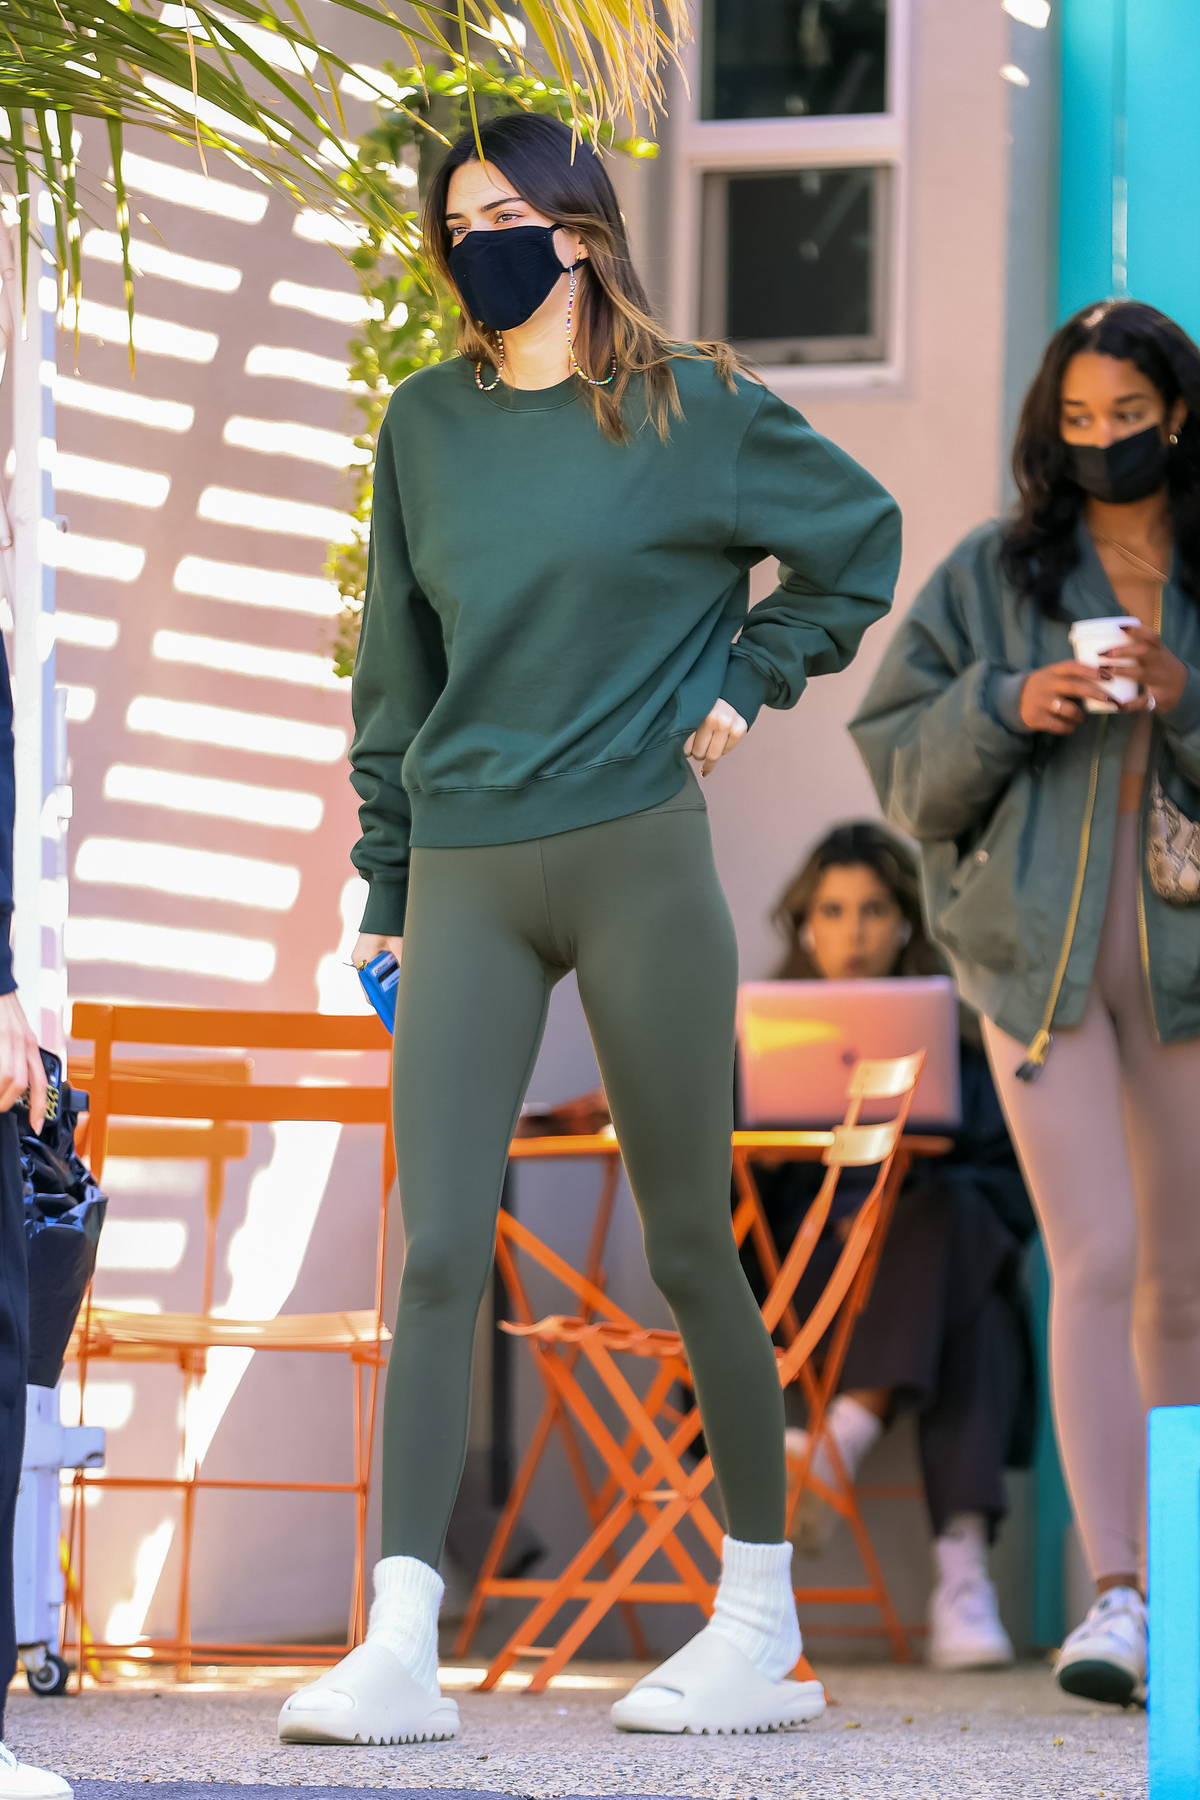 Kendall Jenner shows off her slender figure in leggings while out for  coffee with friends in